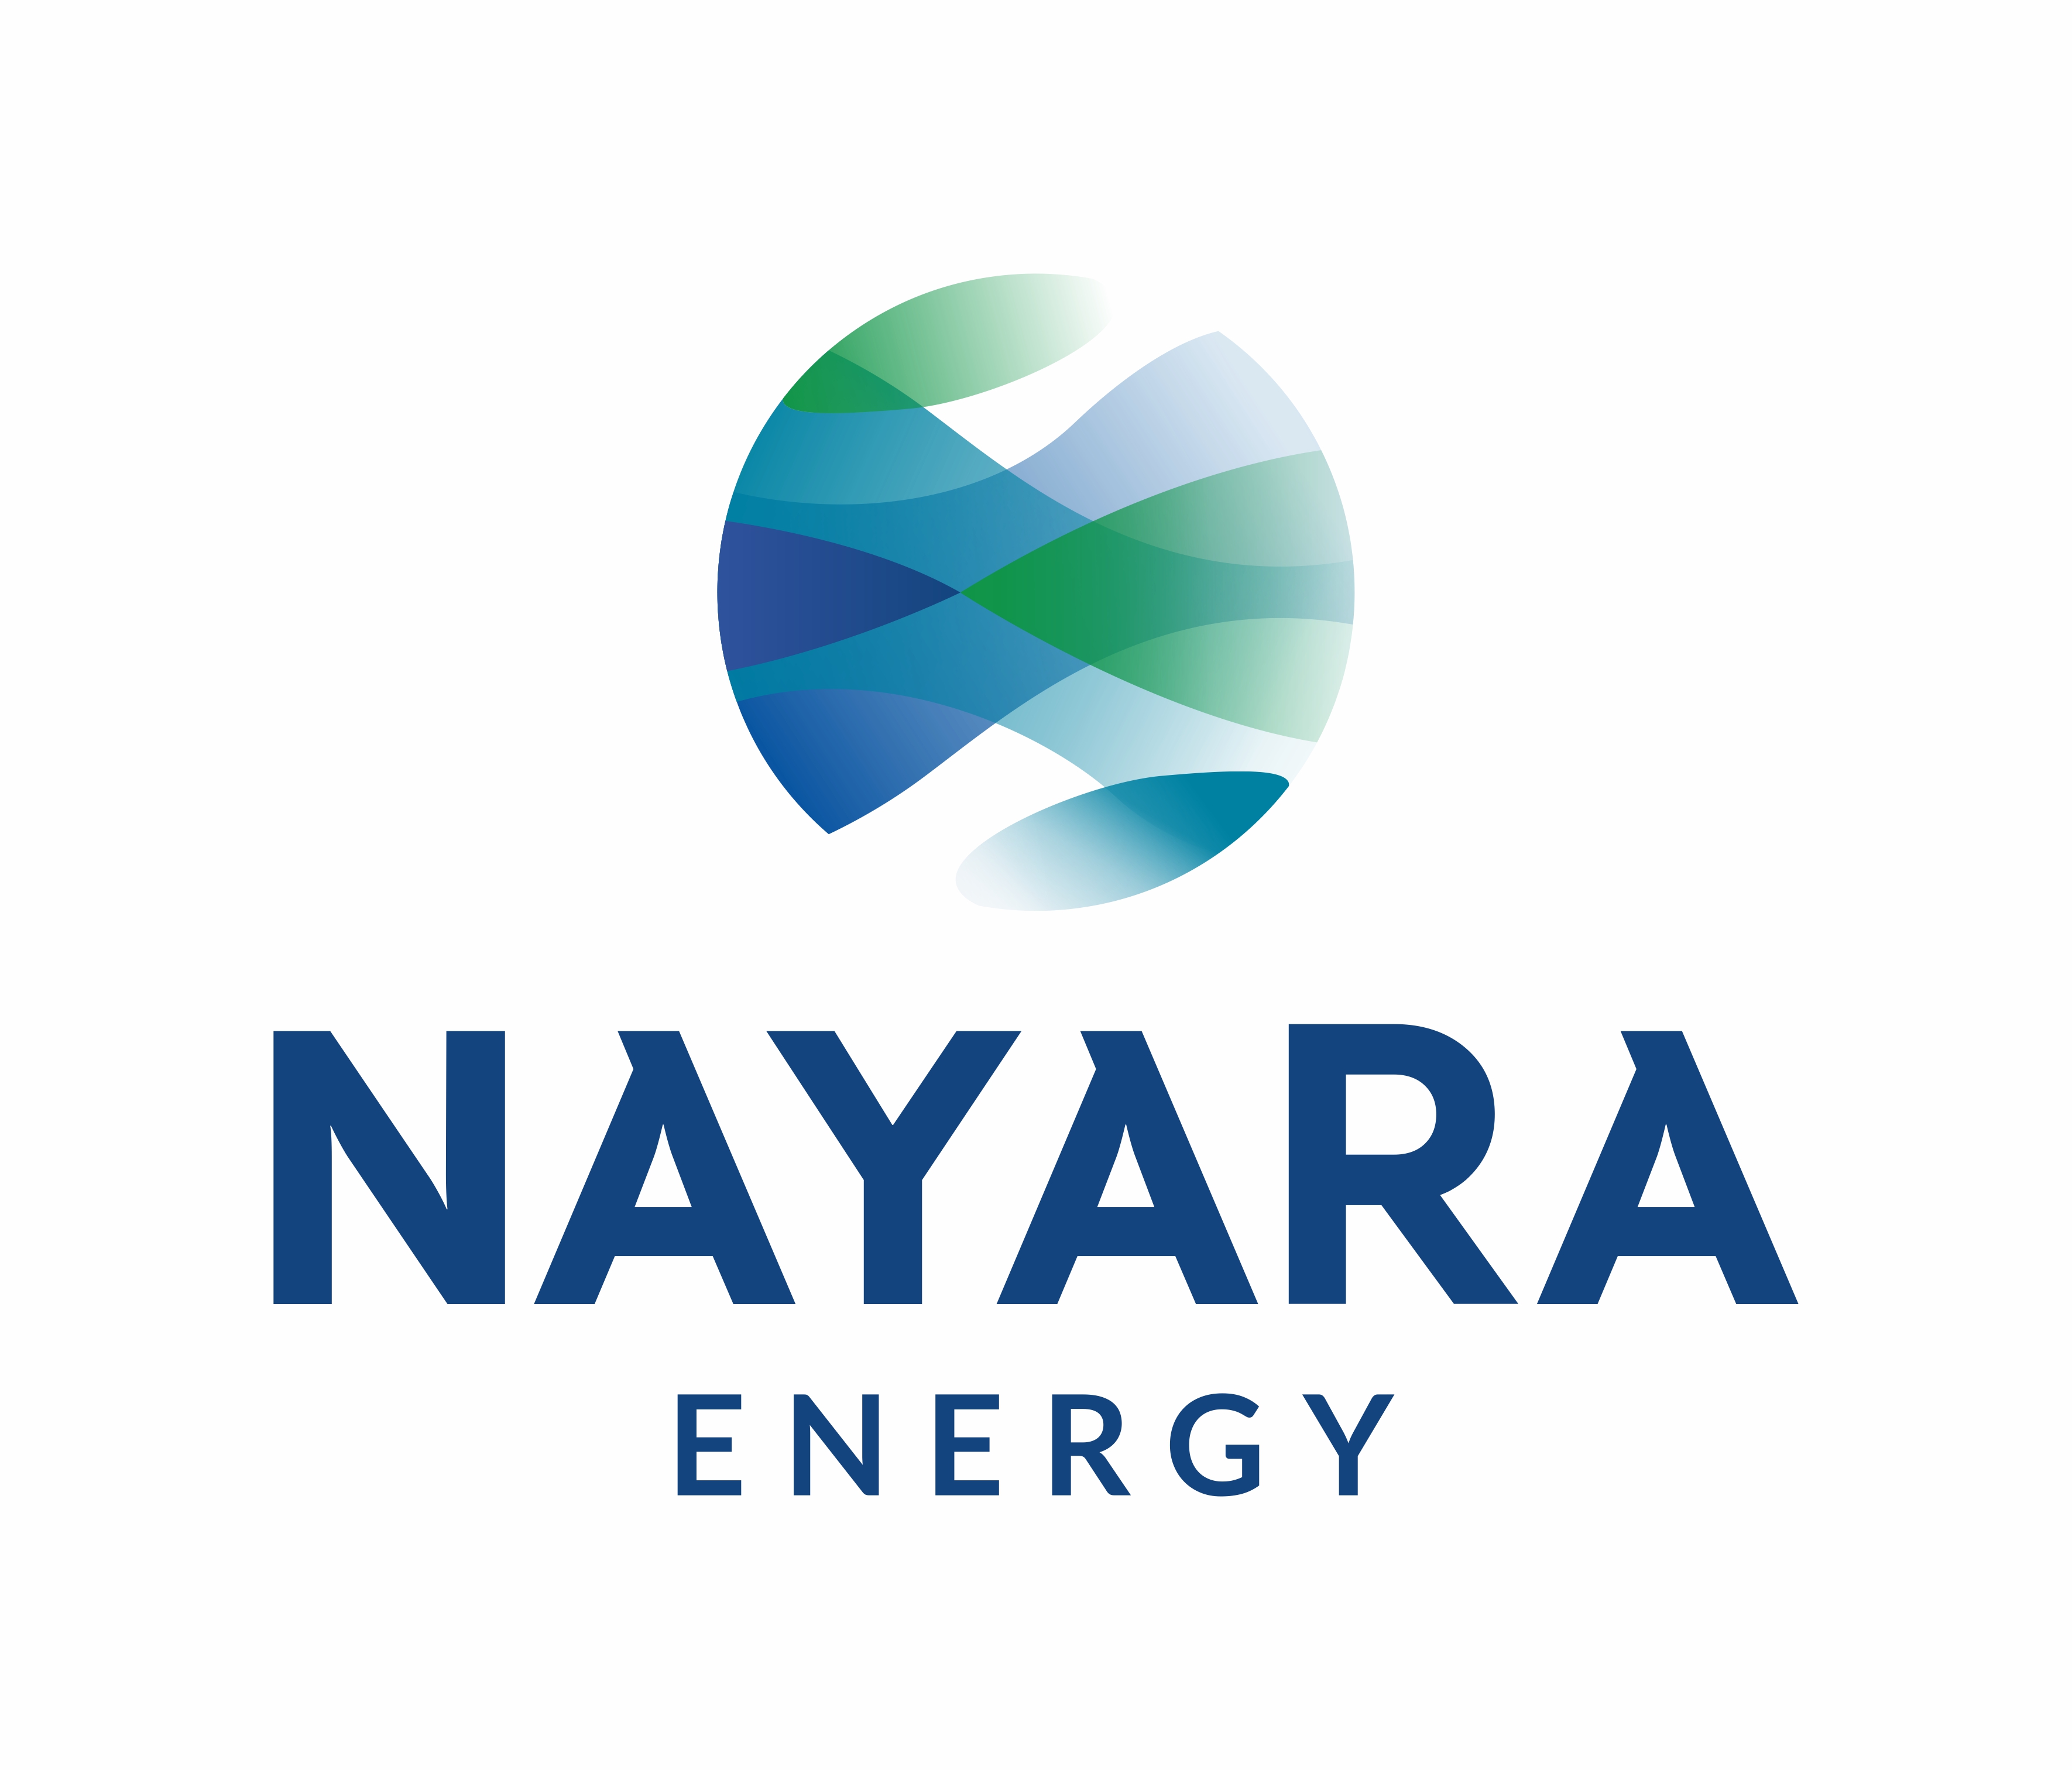 Nayara Energy exports 80% of fuel to Asia, Africa; none to EU